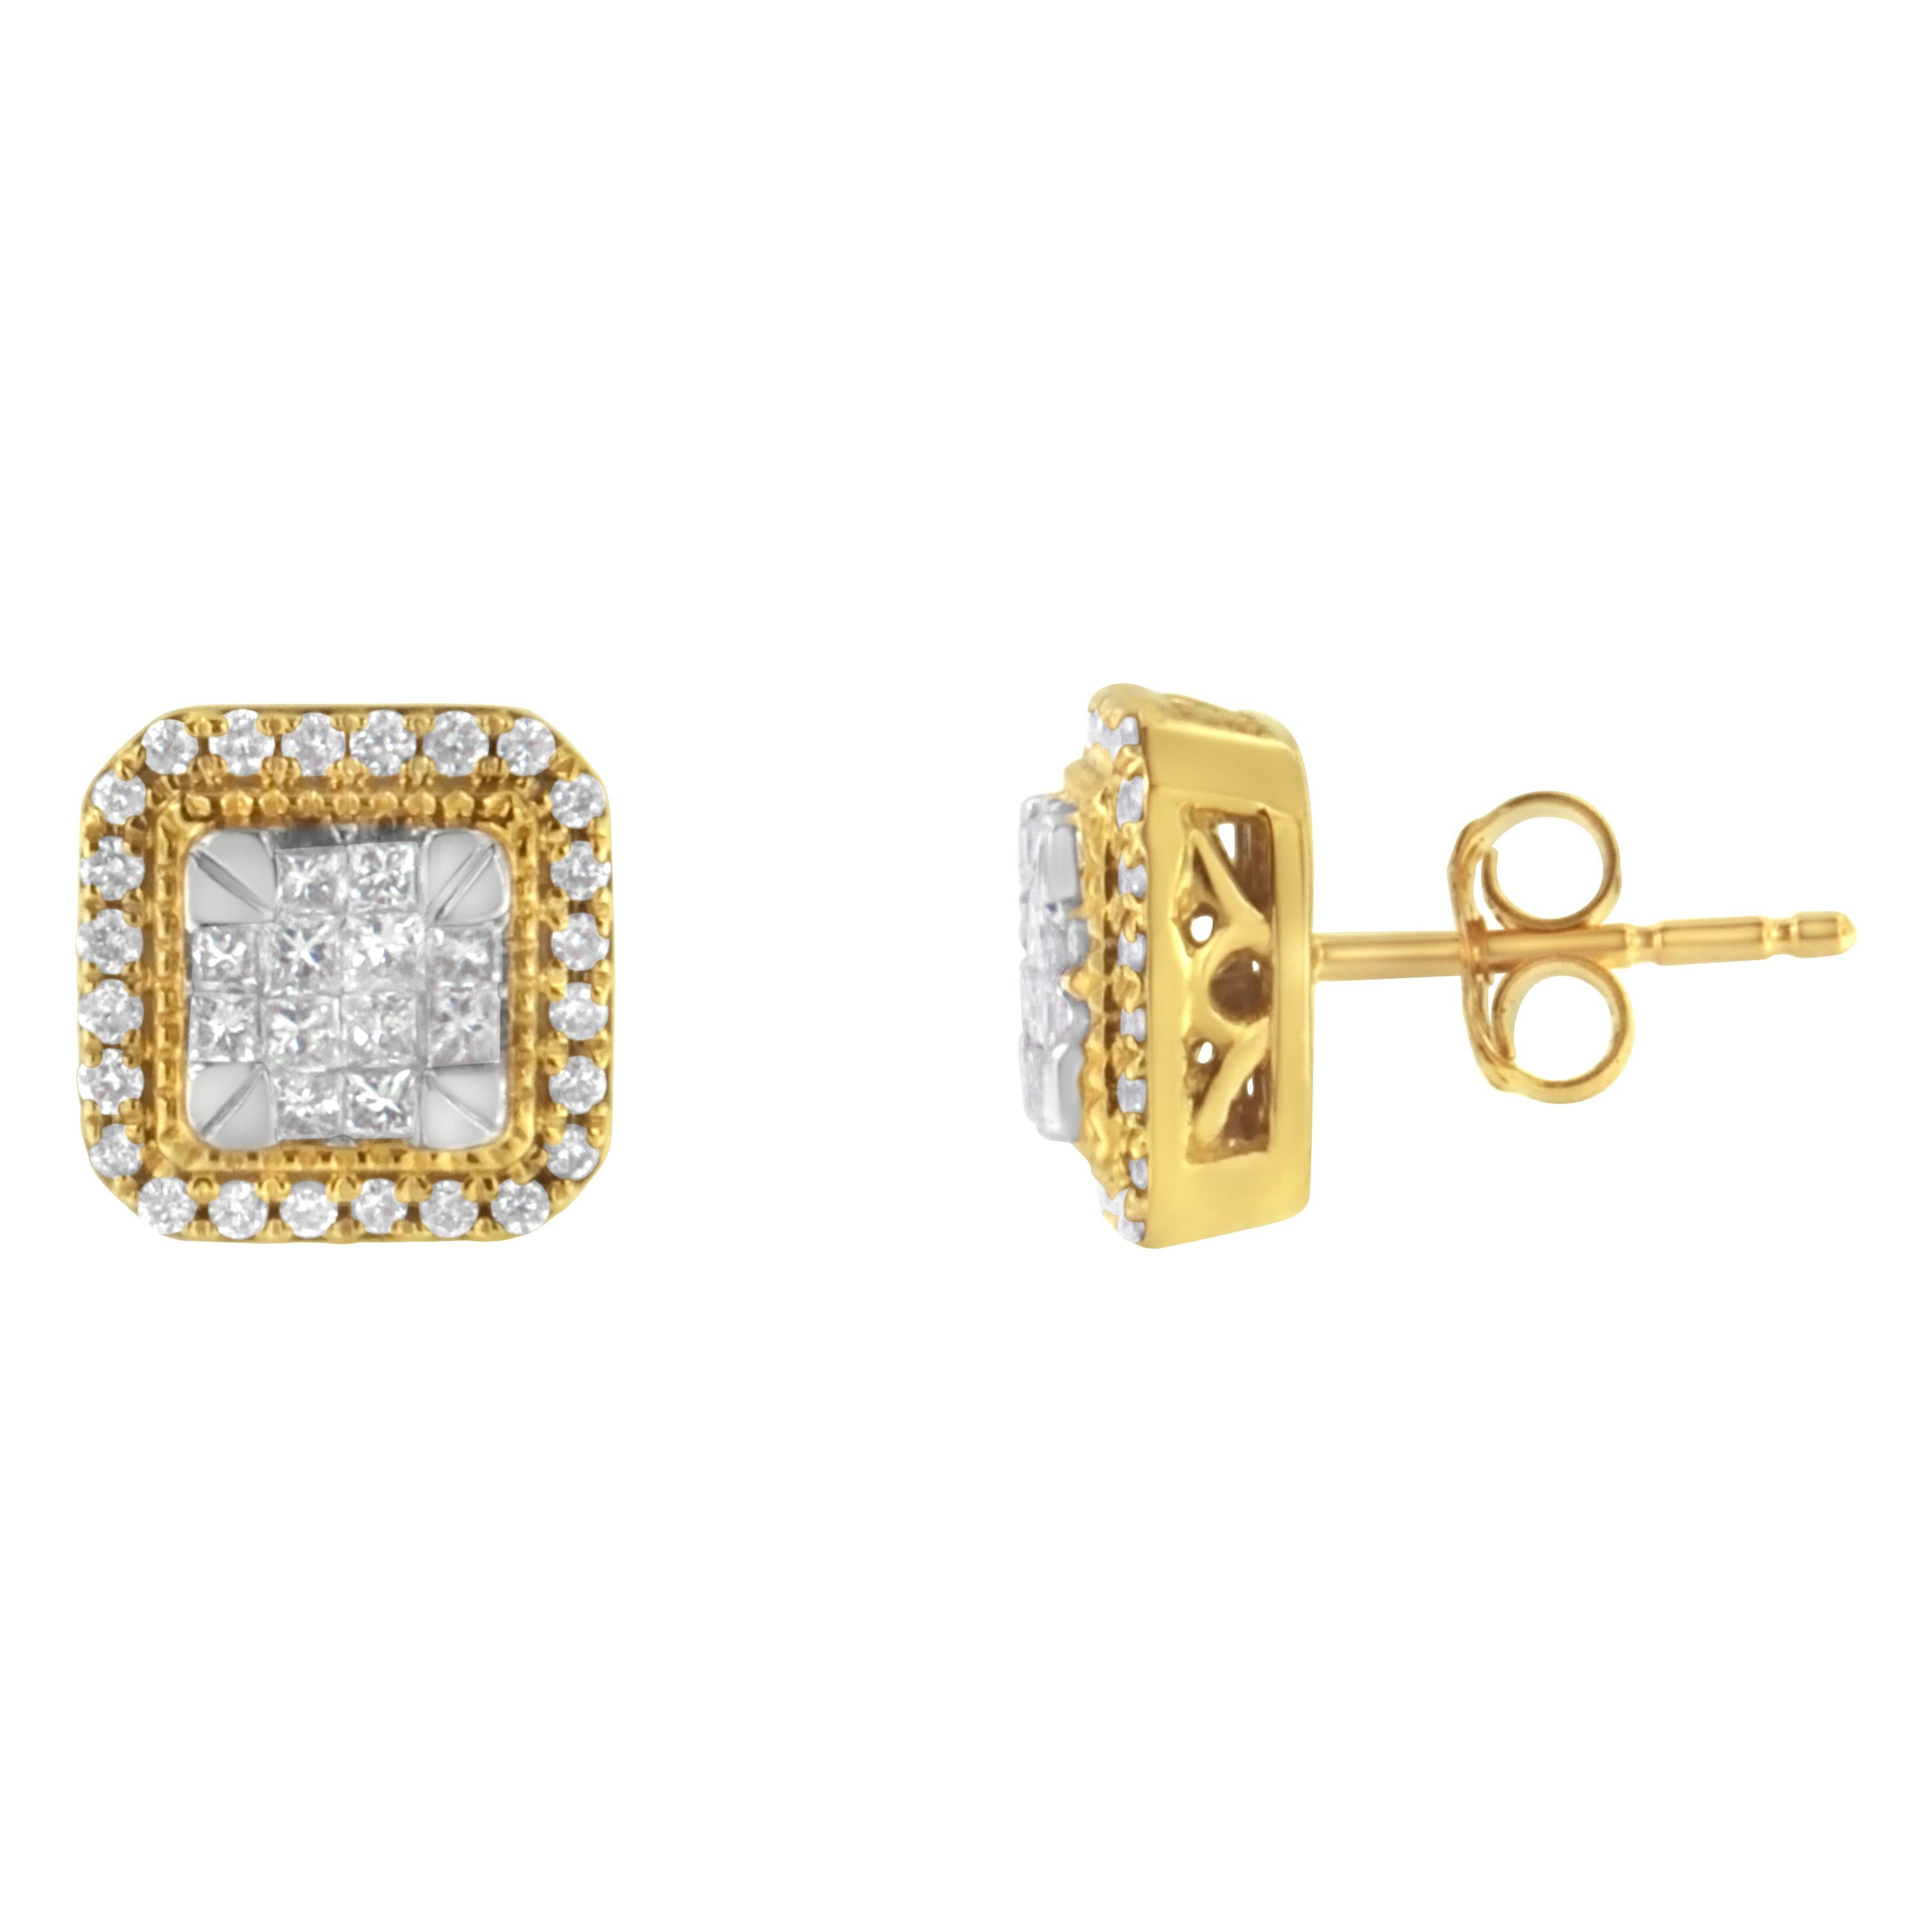 A pair of square diamond cluster stud earring that sparkle with a central cluster of princess cut diamonds surrounded by a halo of round diamonds. Milgrain beading adds a vintage touch to this unique design crafted in 10 karat yellow gold. They have